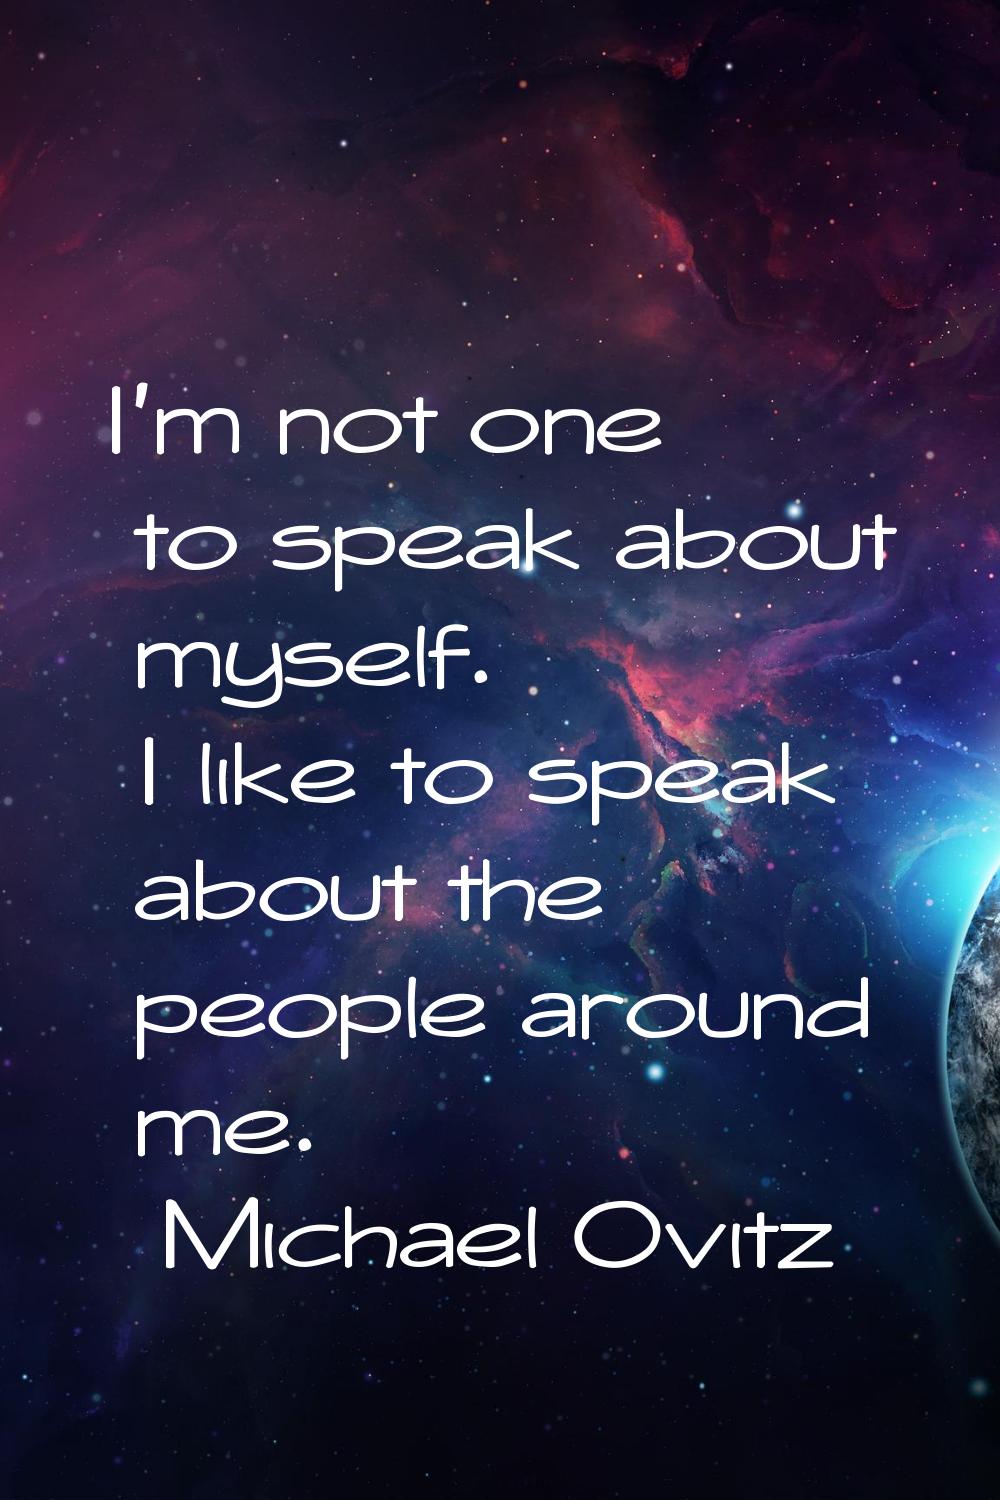 I'm not one to speak about myself. I like to speak about the people around me.